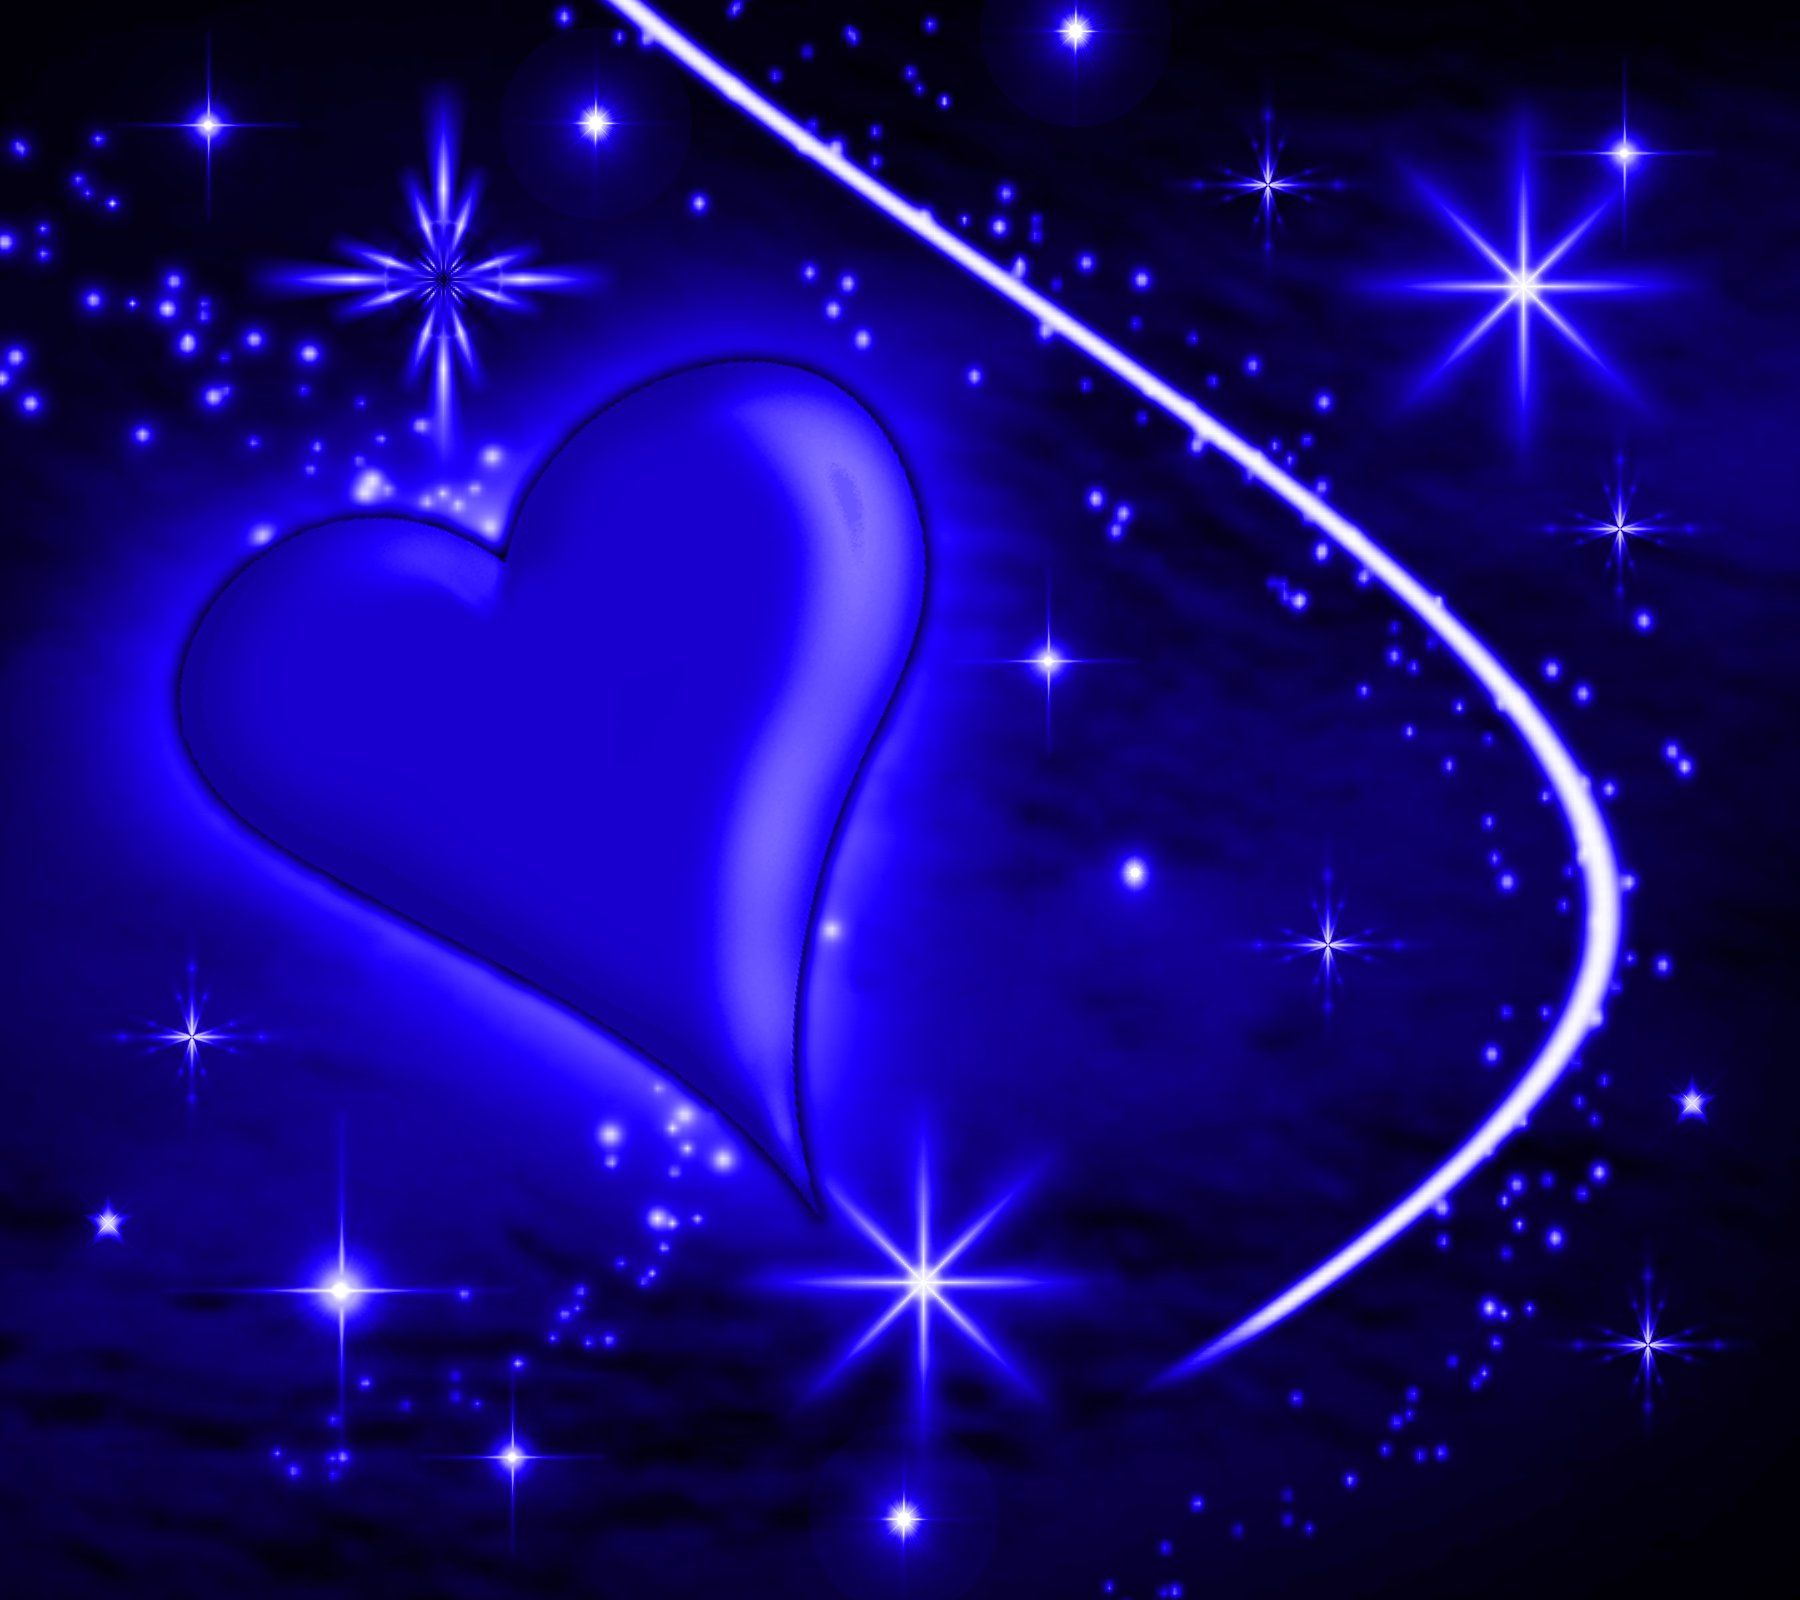 Blue Heart With Plasma Stars Background 1800x1600 Background Image, Wallpaper or Texture free for any web page, des. Star background, Blue heart, Heart background